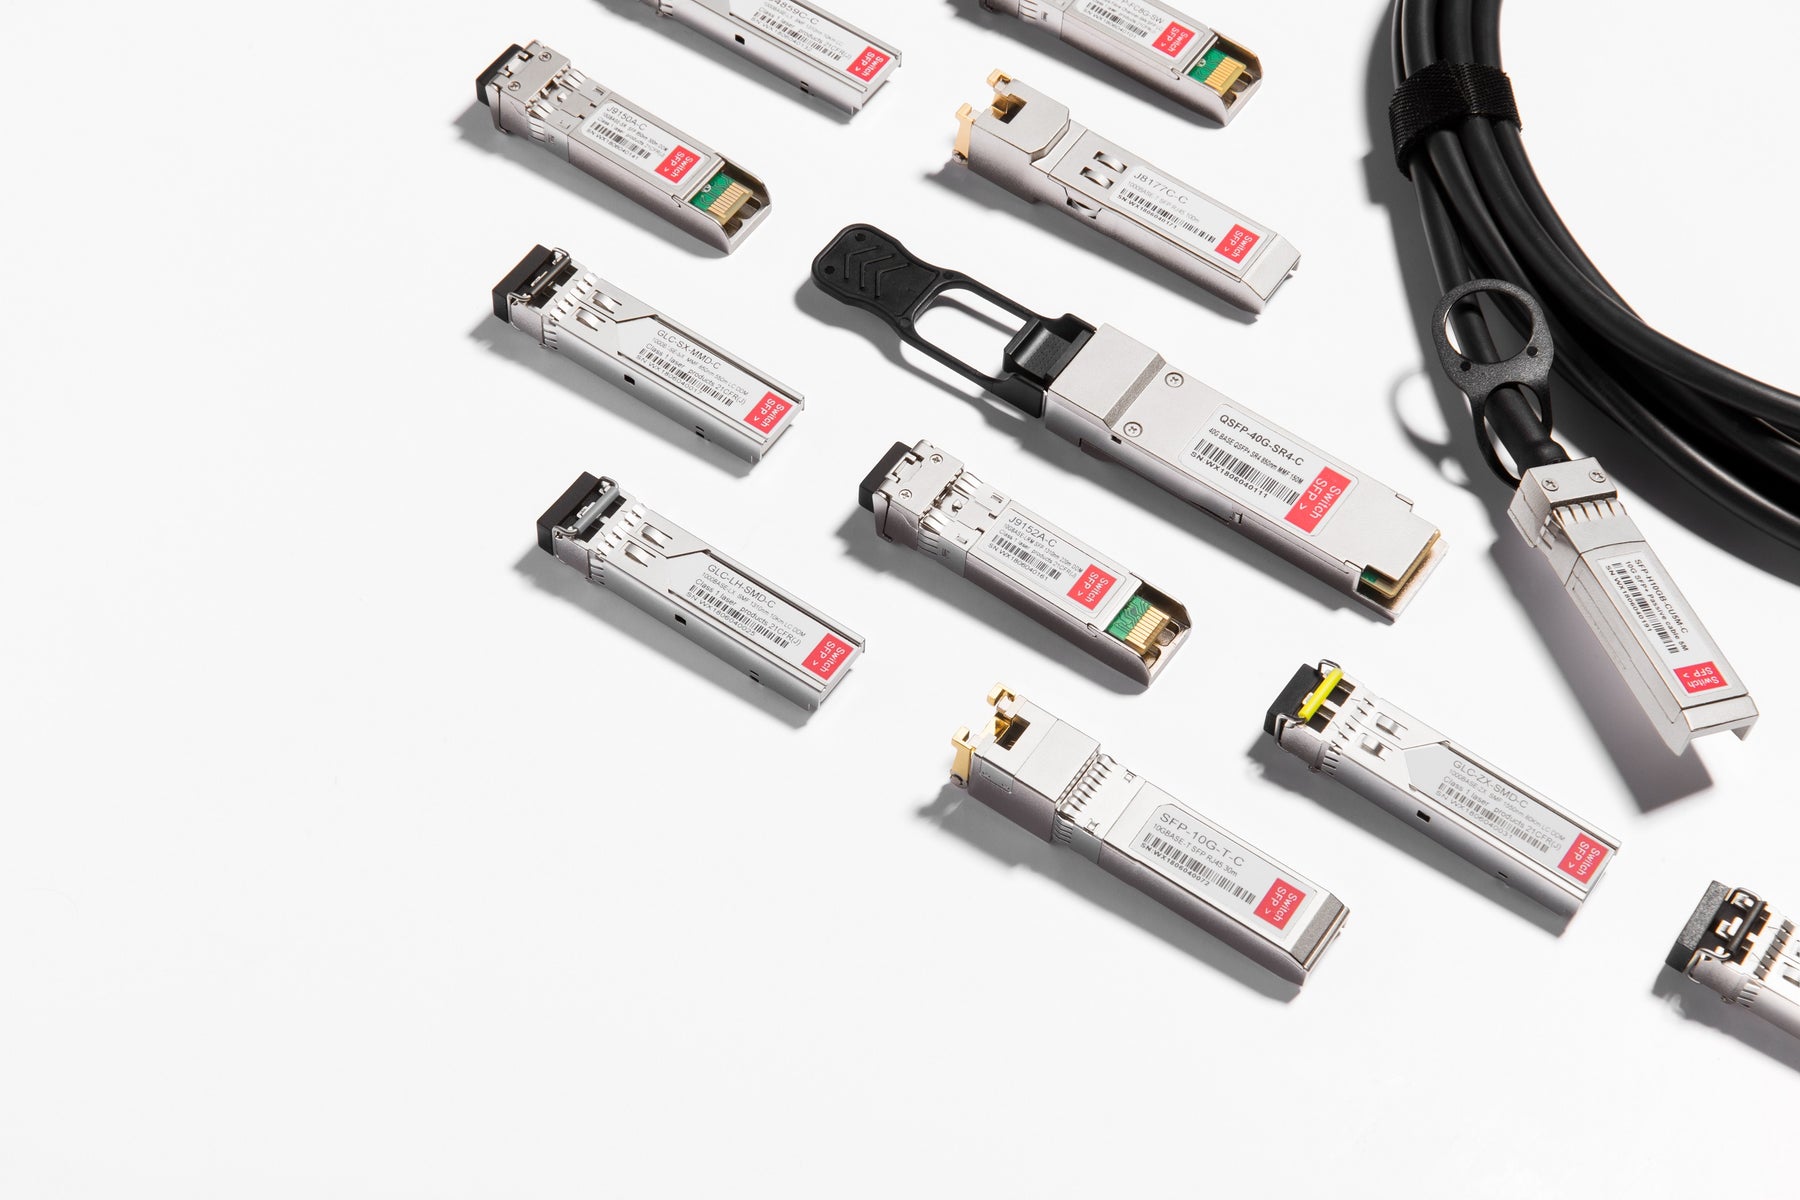 Switch SFP Ltd is a UK based trusted and reliable partner for over 90 Vendor compatible optical Transceivers.